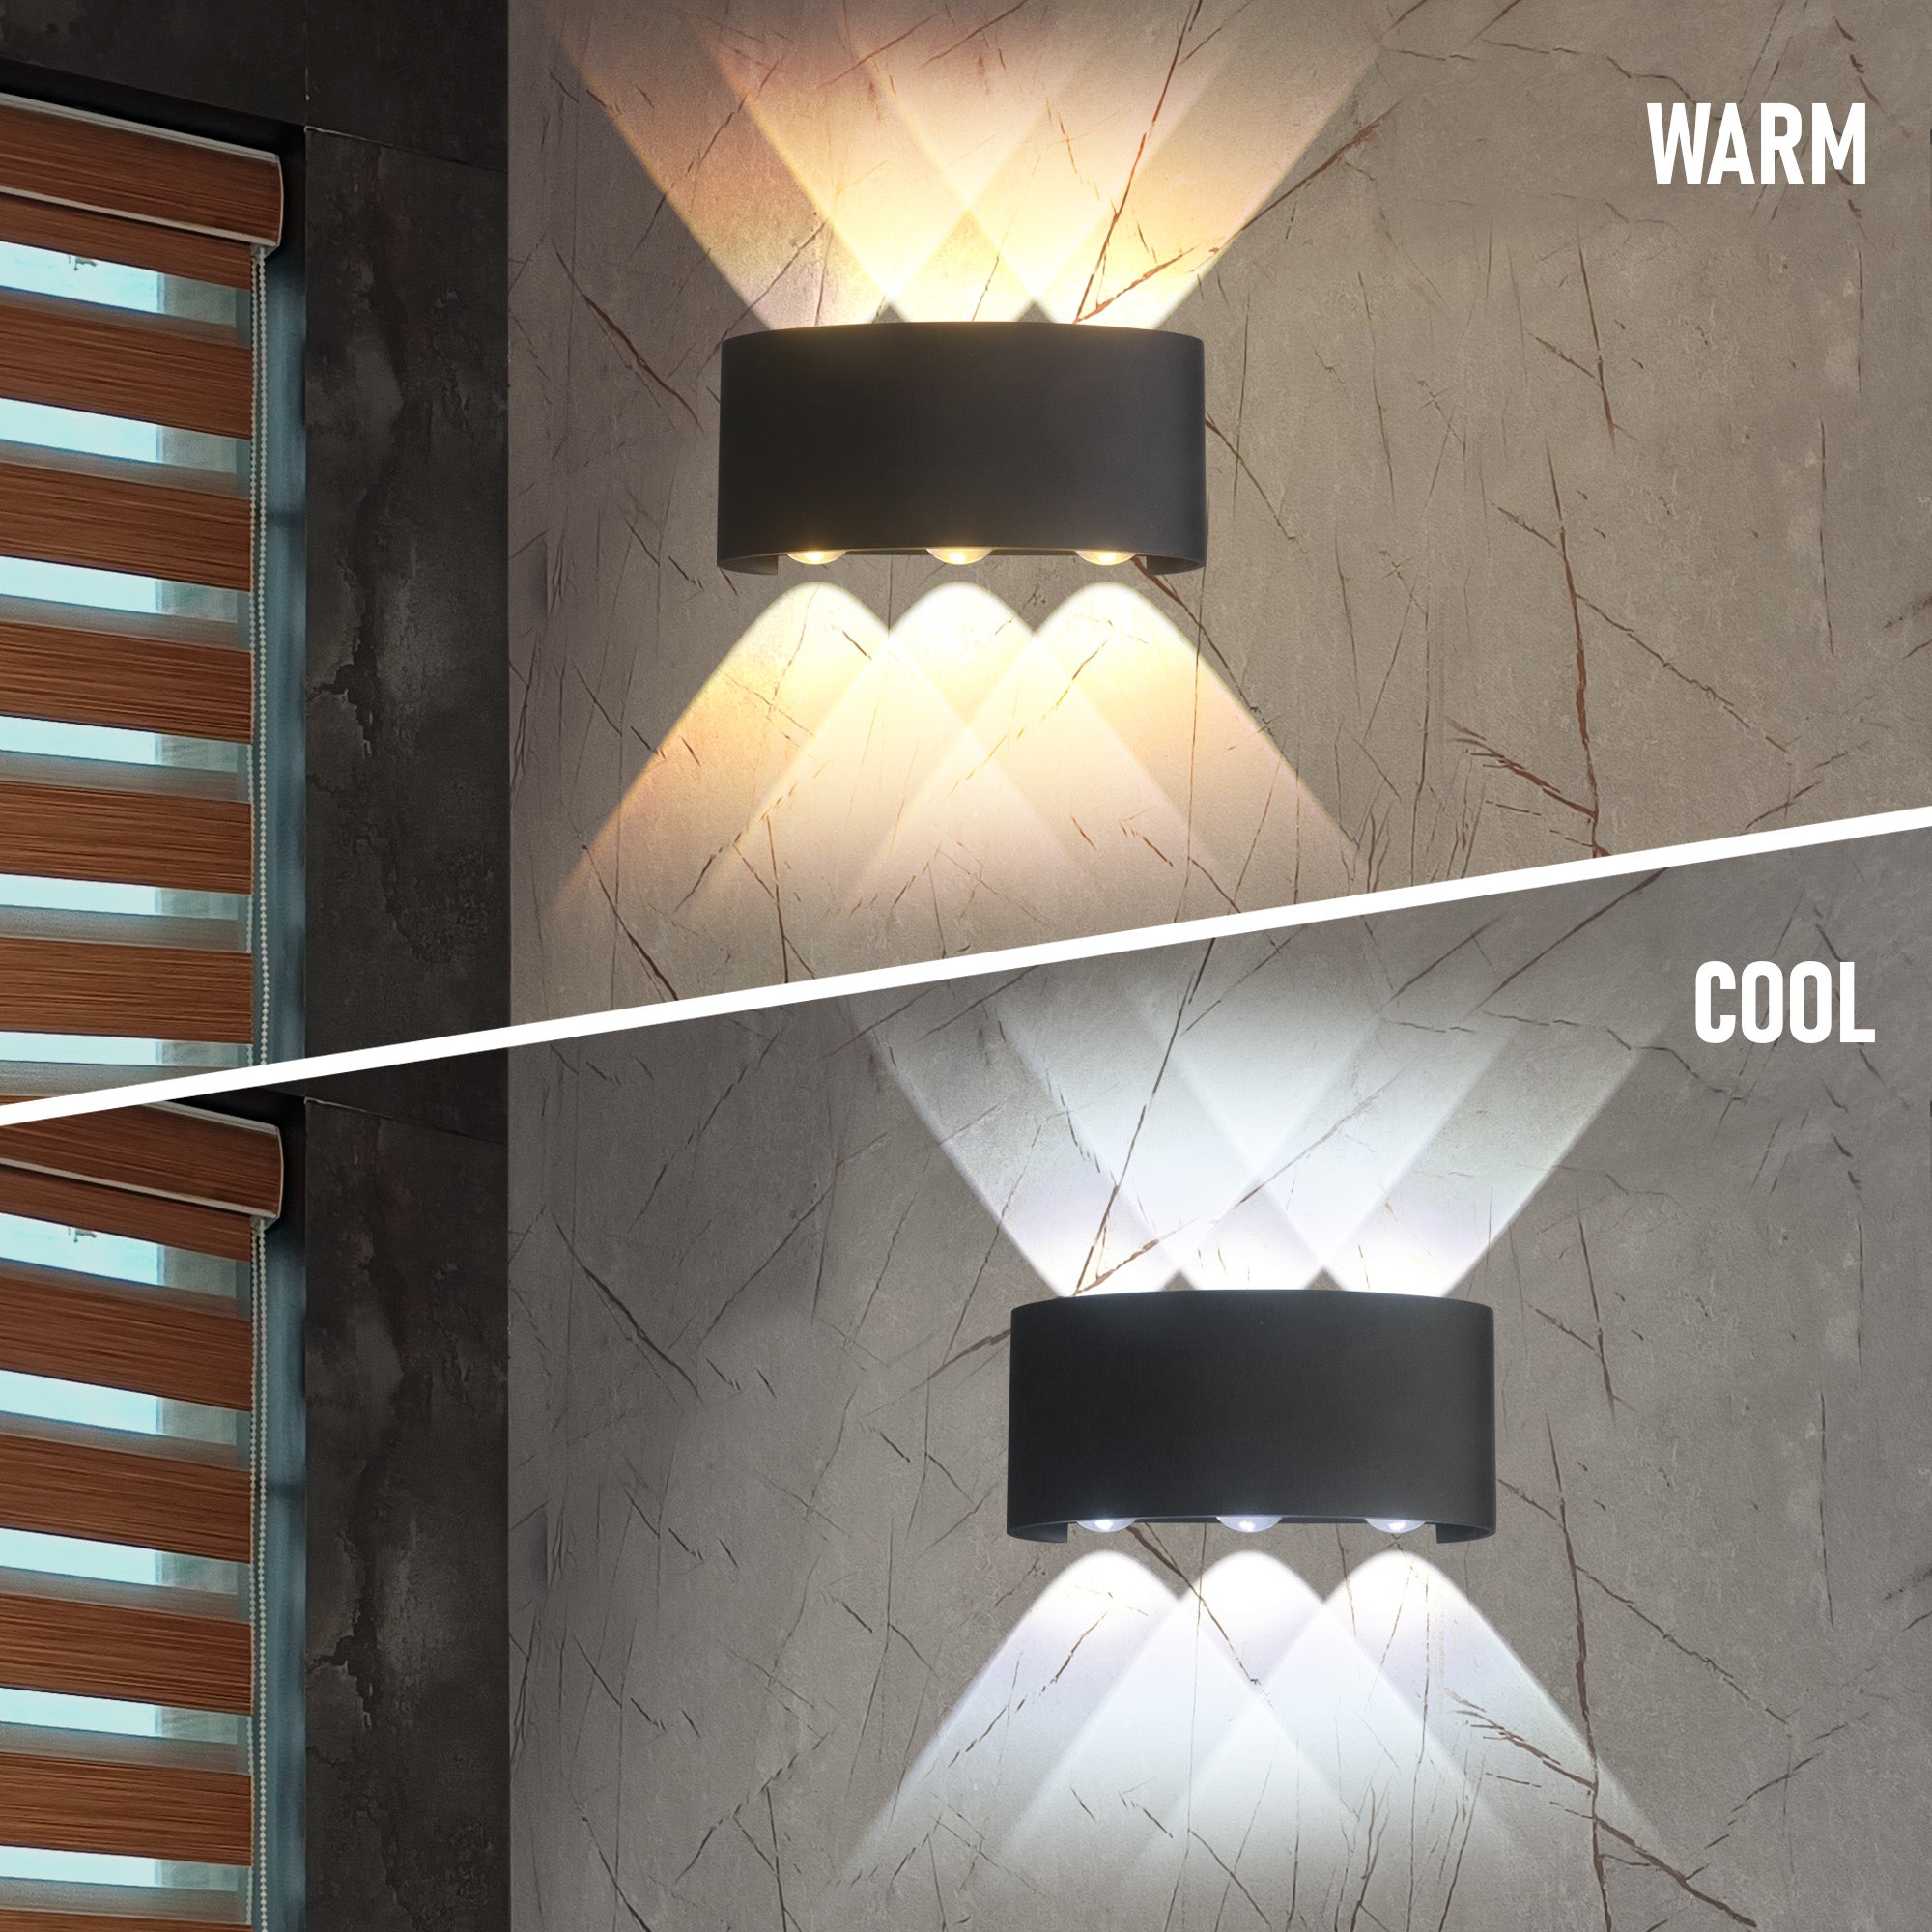 Cool and warm lighting comparison of Ezme 3 way up and down led wall light #type_3 way